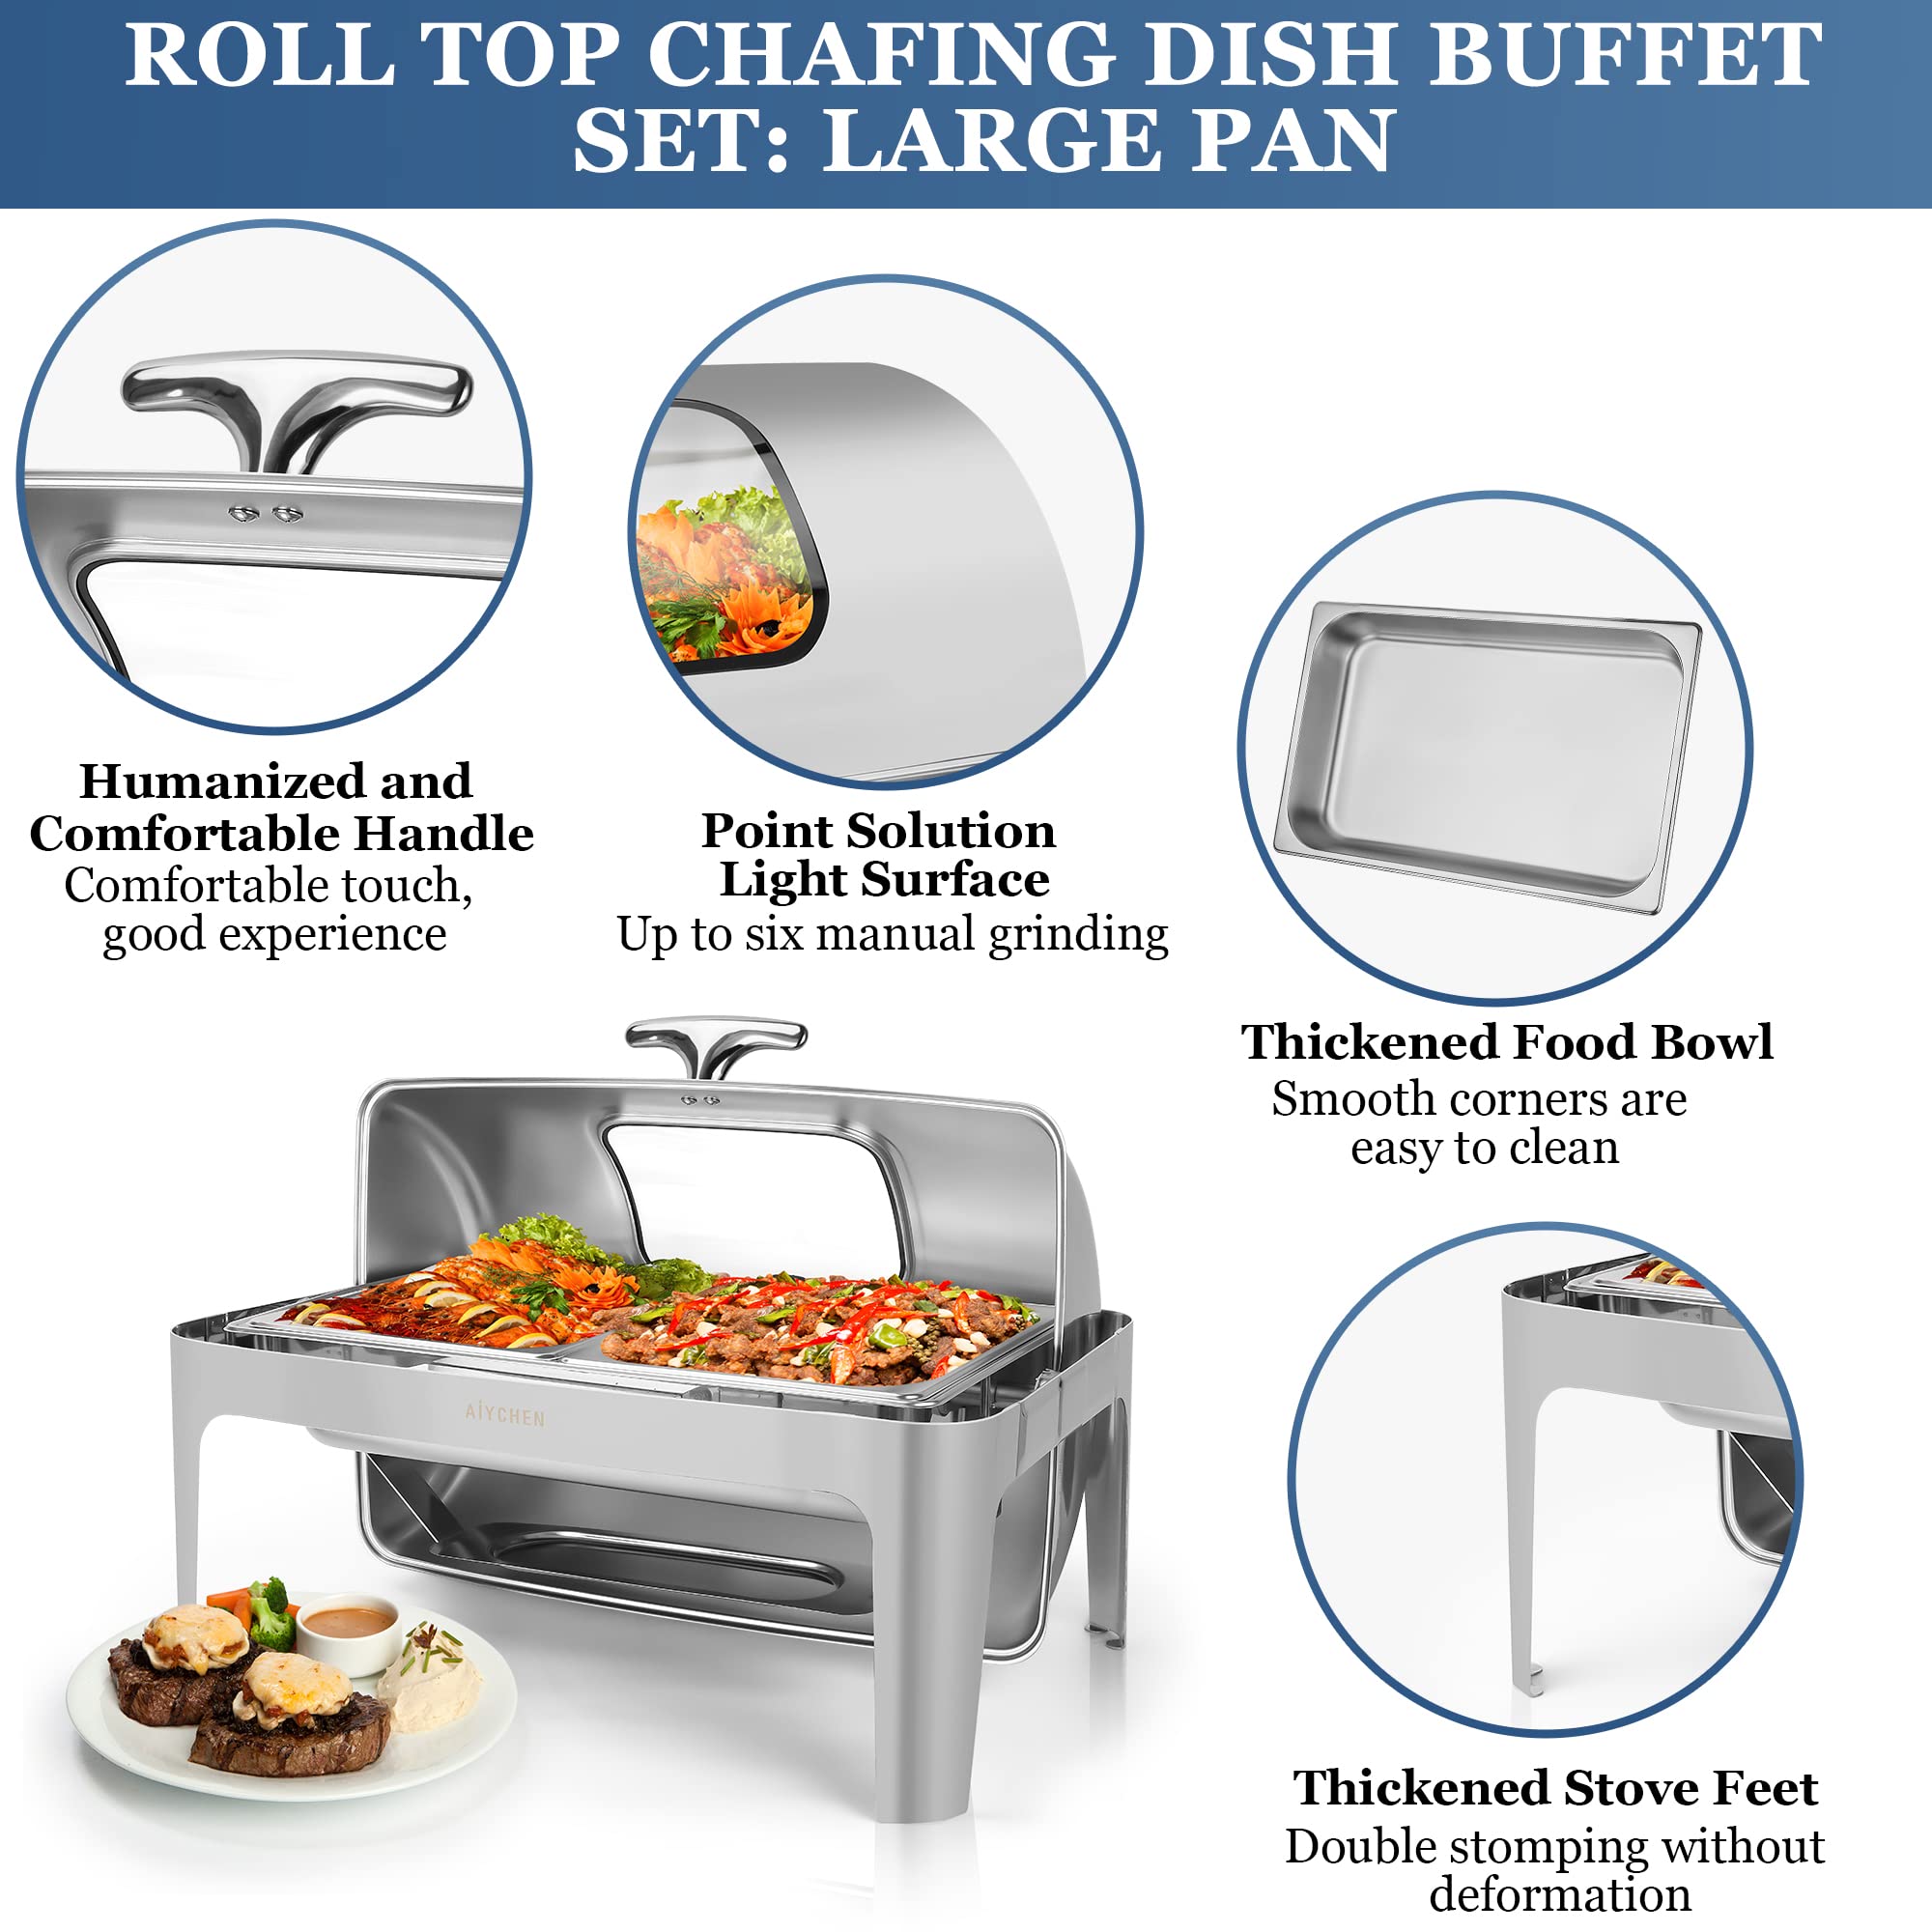 Chafing Dish Buffet Set 9 QT Chafers and Buffet Warmers Sets High Grade Stainless Steel Chafer Complete Set with Gas Container Visual Lid Spoon Temperature Control for Catering Supplies (2 Pan)